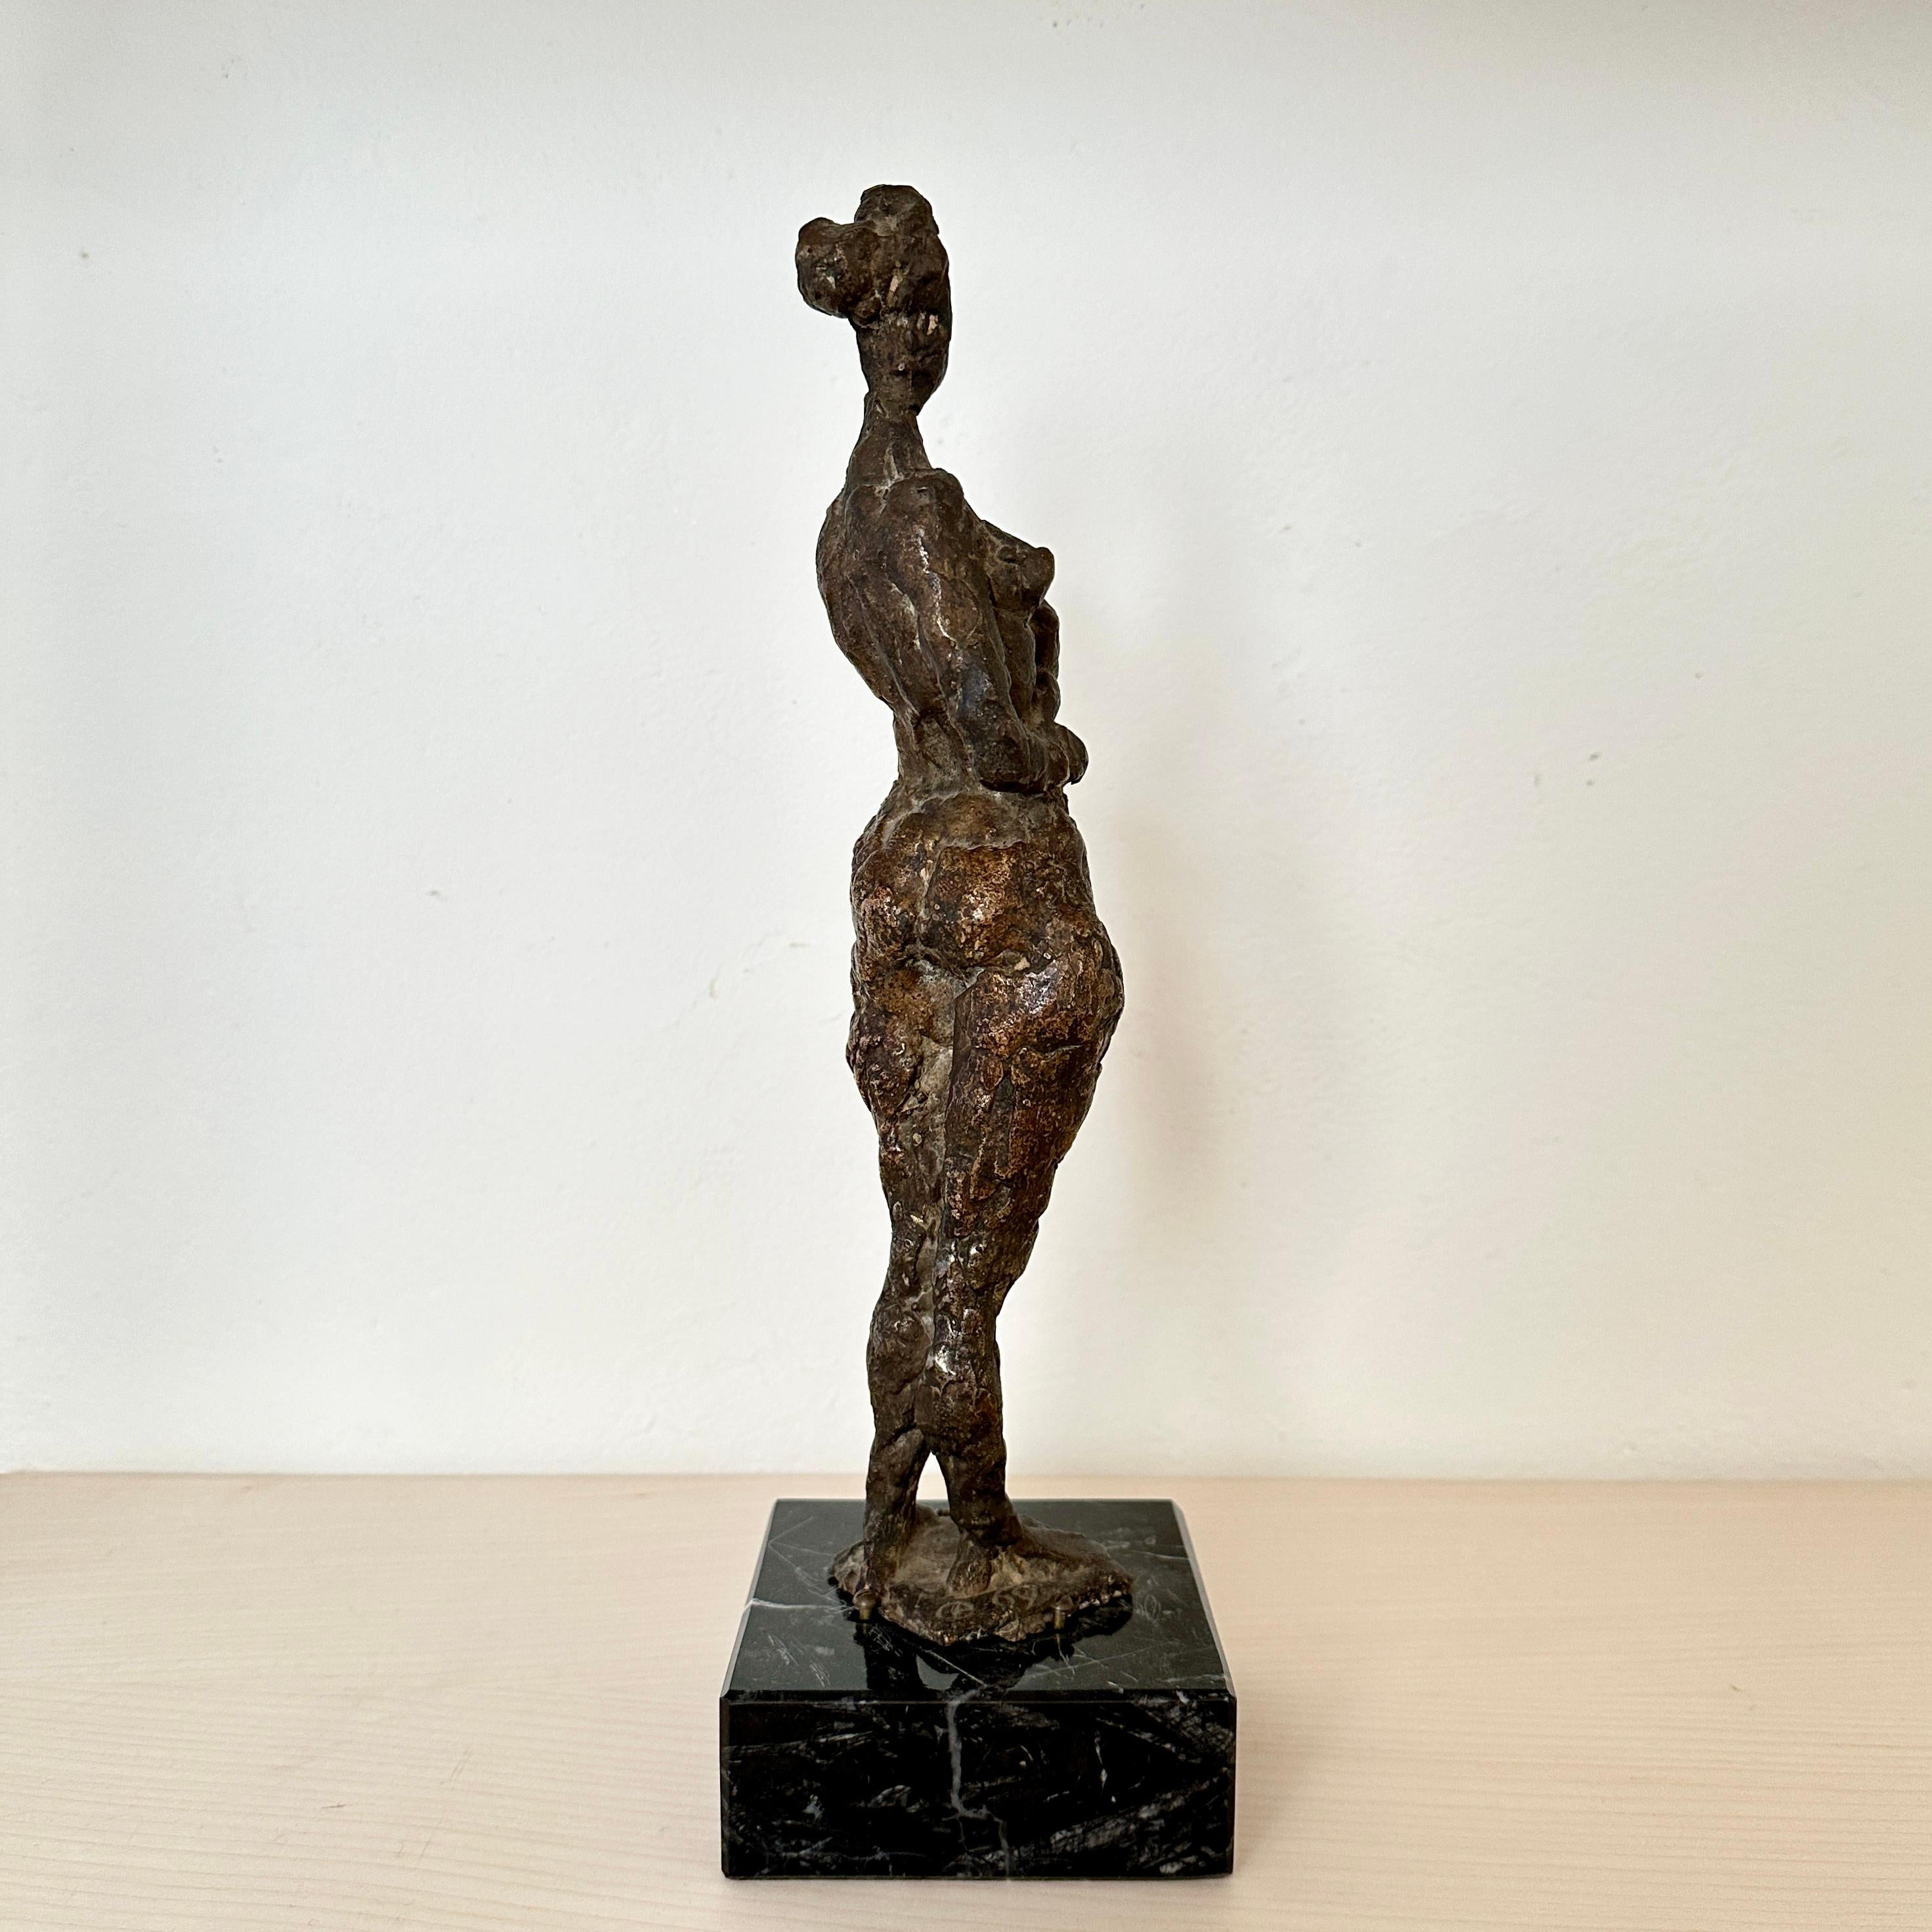 Small Cast Bronze Woman Sculpture by Oskar Bottoli on a Black Marble Stand, 1969 For Sale 7